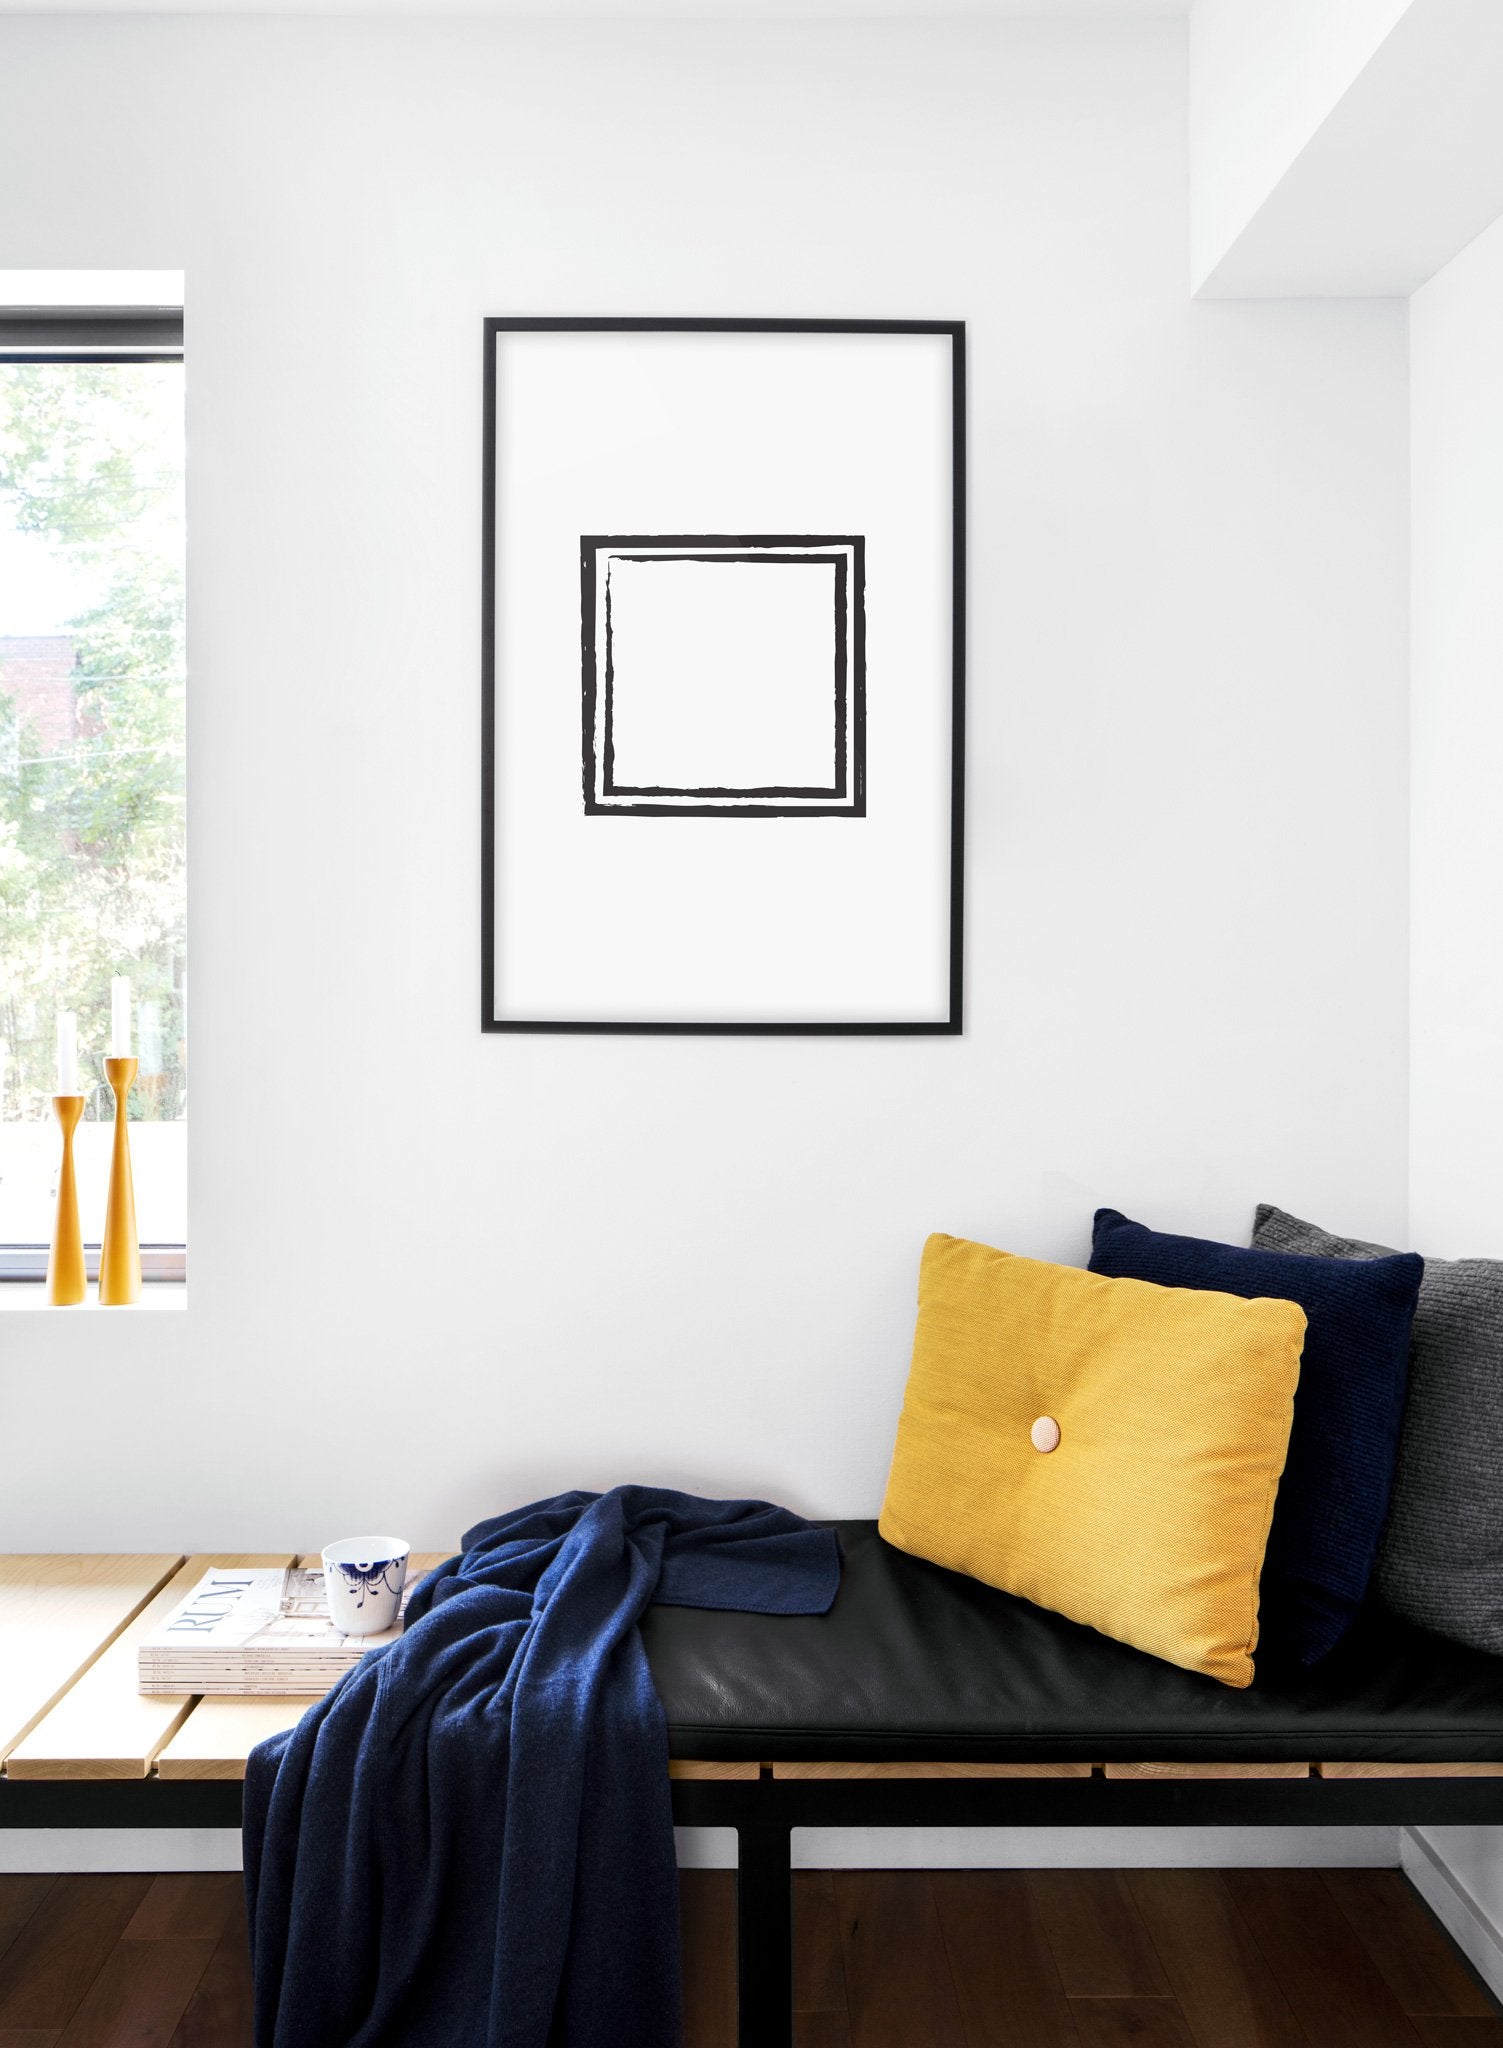 Scandinavian poster by Opposite Wall with Black Square hand-made art design - Cozy living room nook